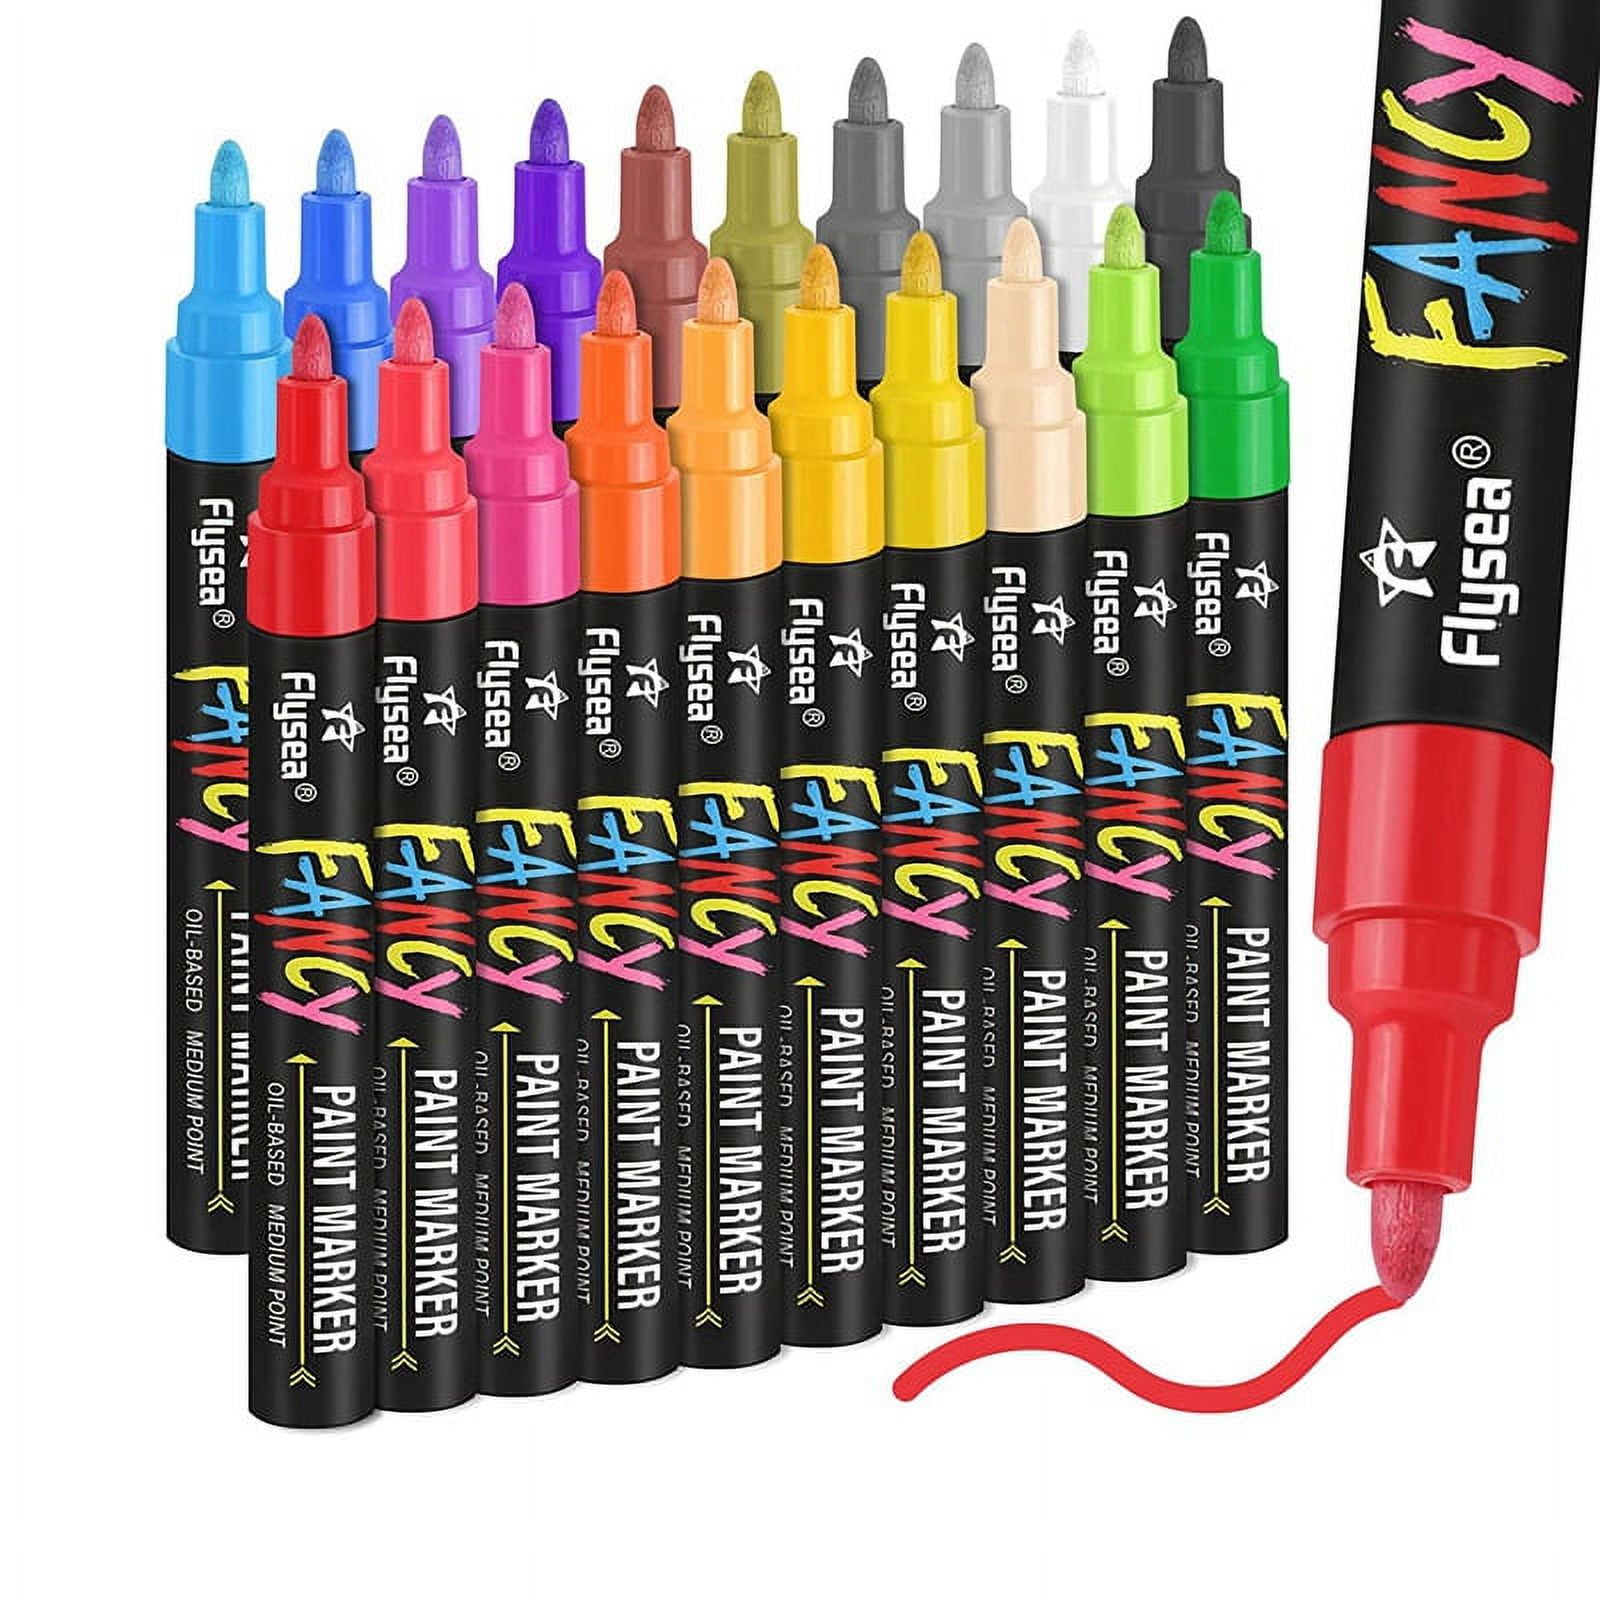 Oil Paint Markers Assorted Colors 20pk - Paint Pens & Markers - Art Supplies & Painting